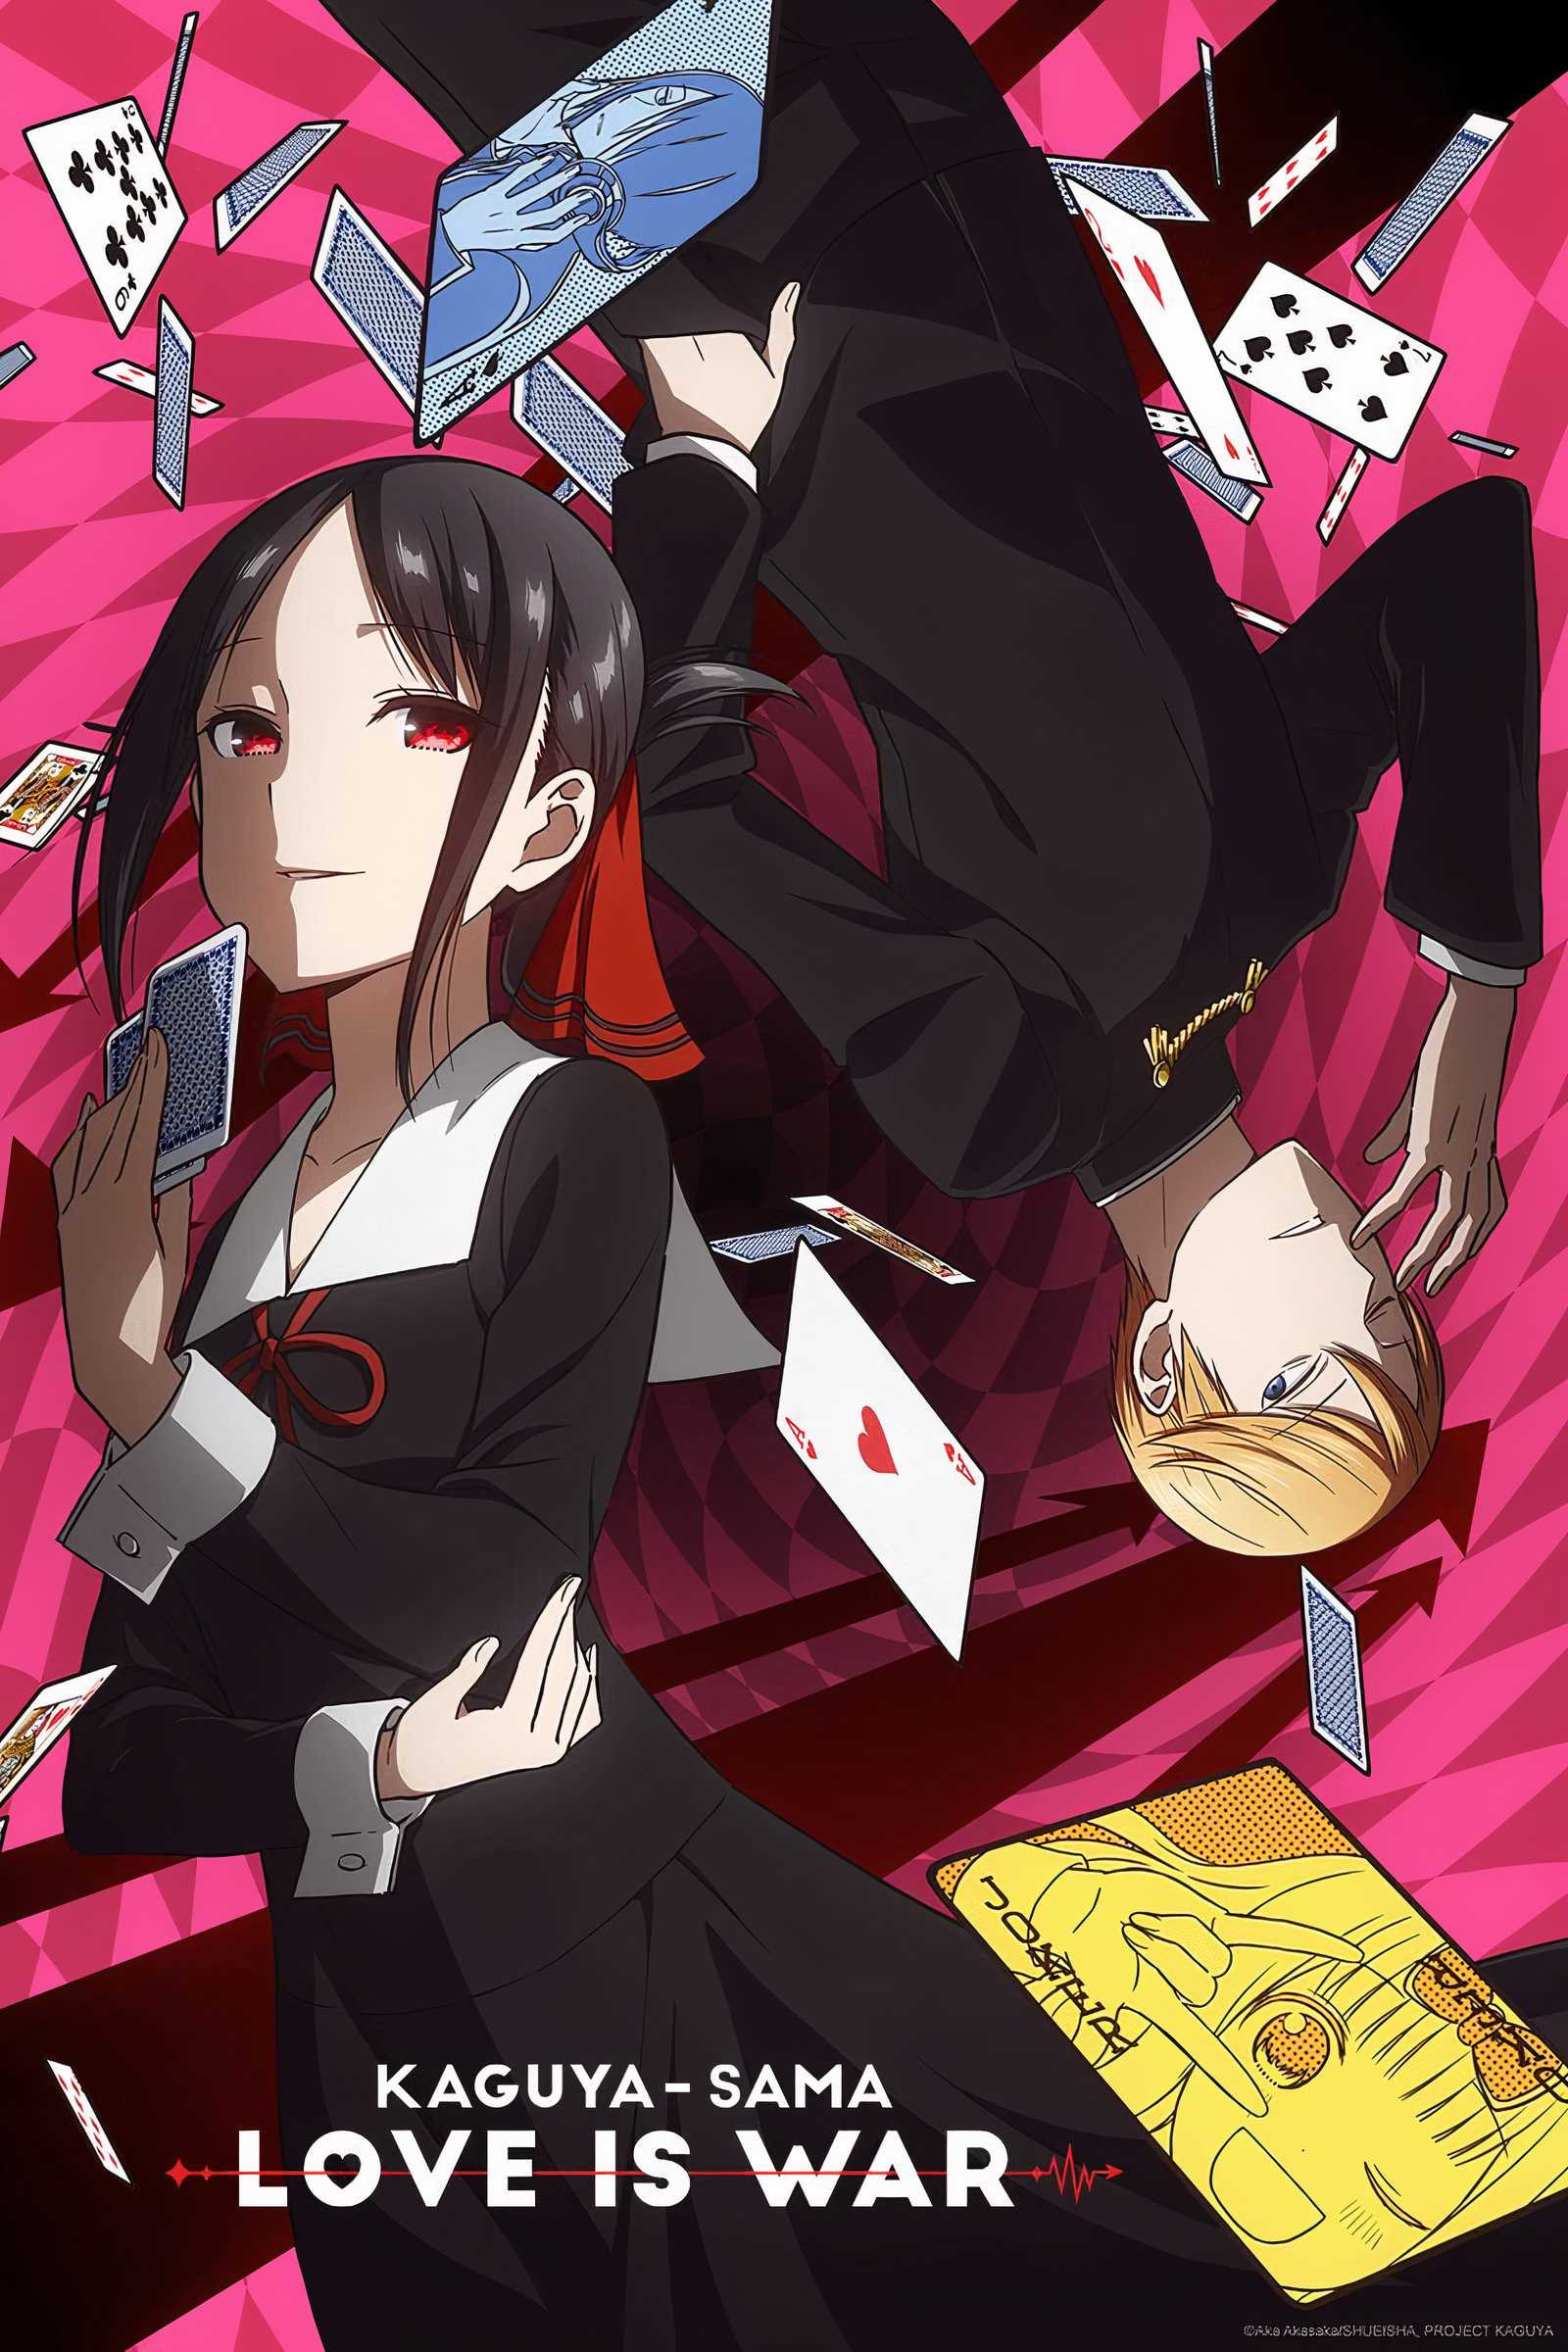 kaguya sama love is war movie the first kiss that never ends was